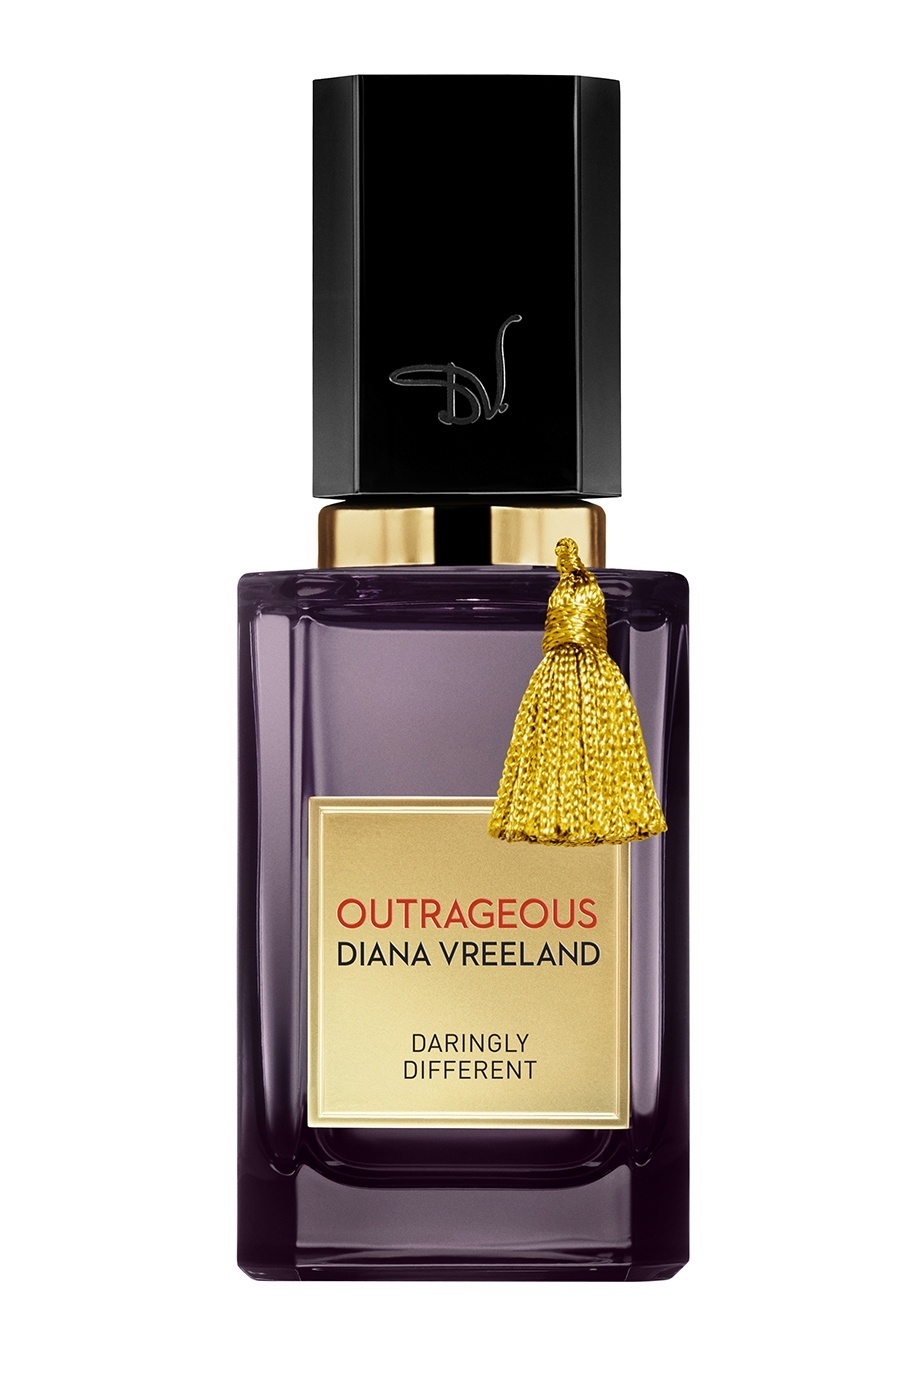 DIANA VREELAND OUTRAGEOUS DARINGLY DIFFERENT